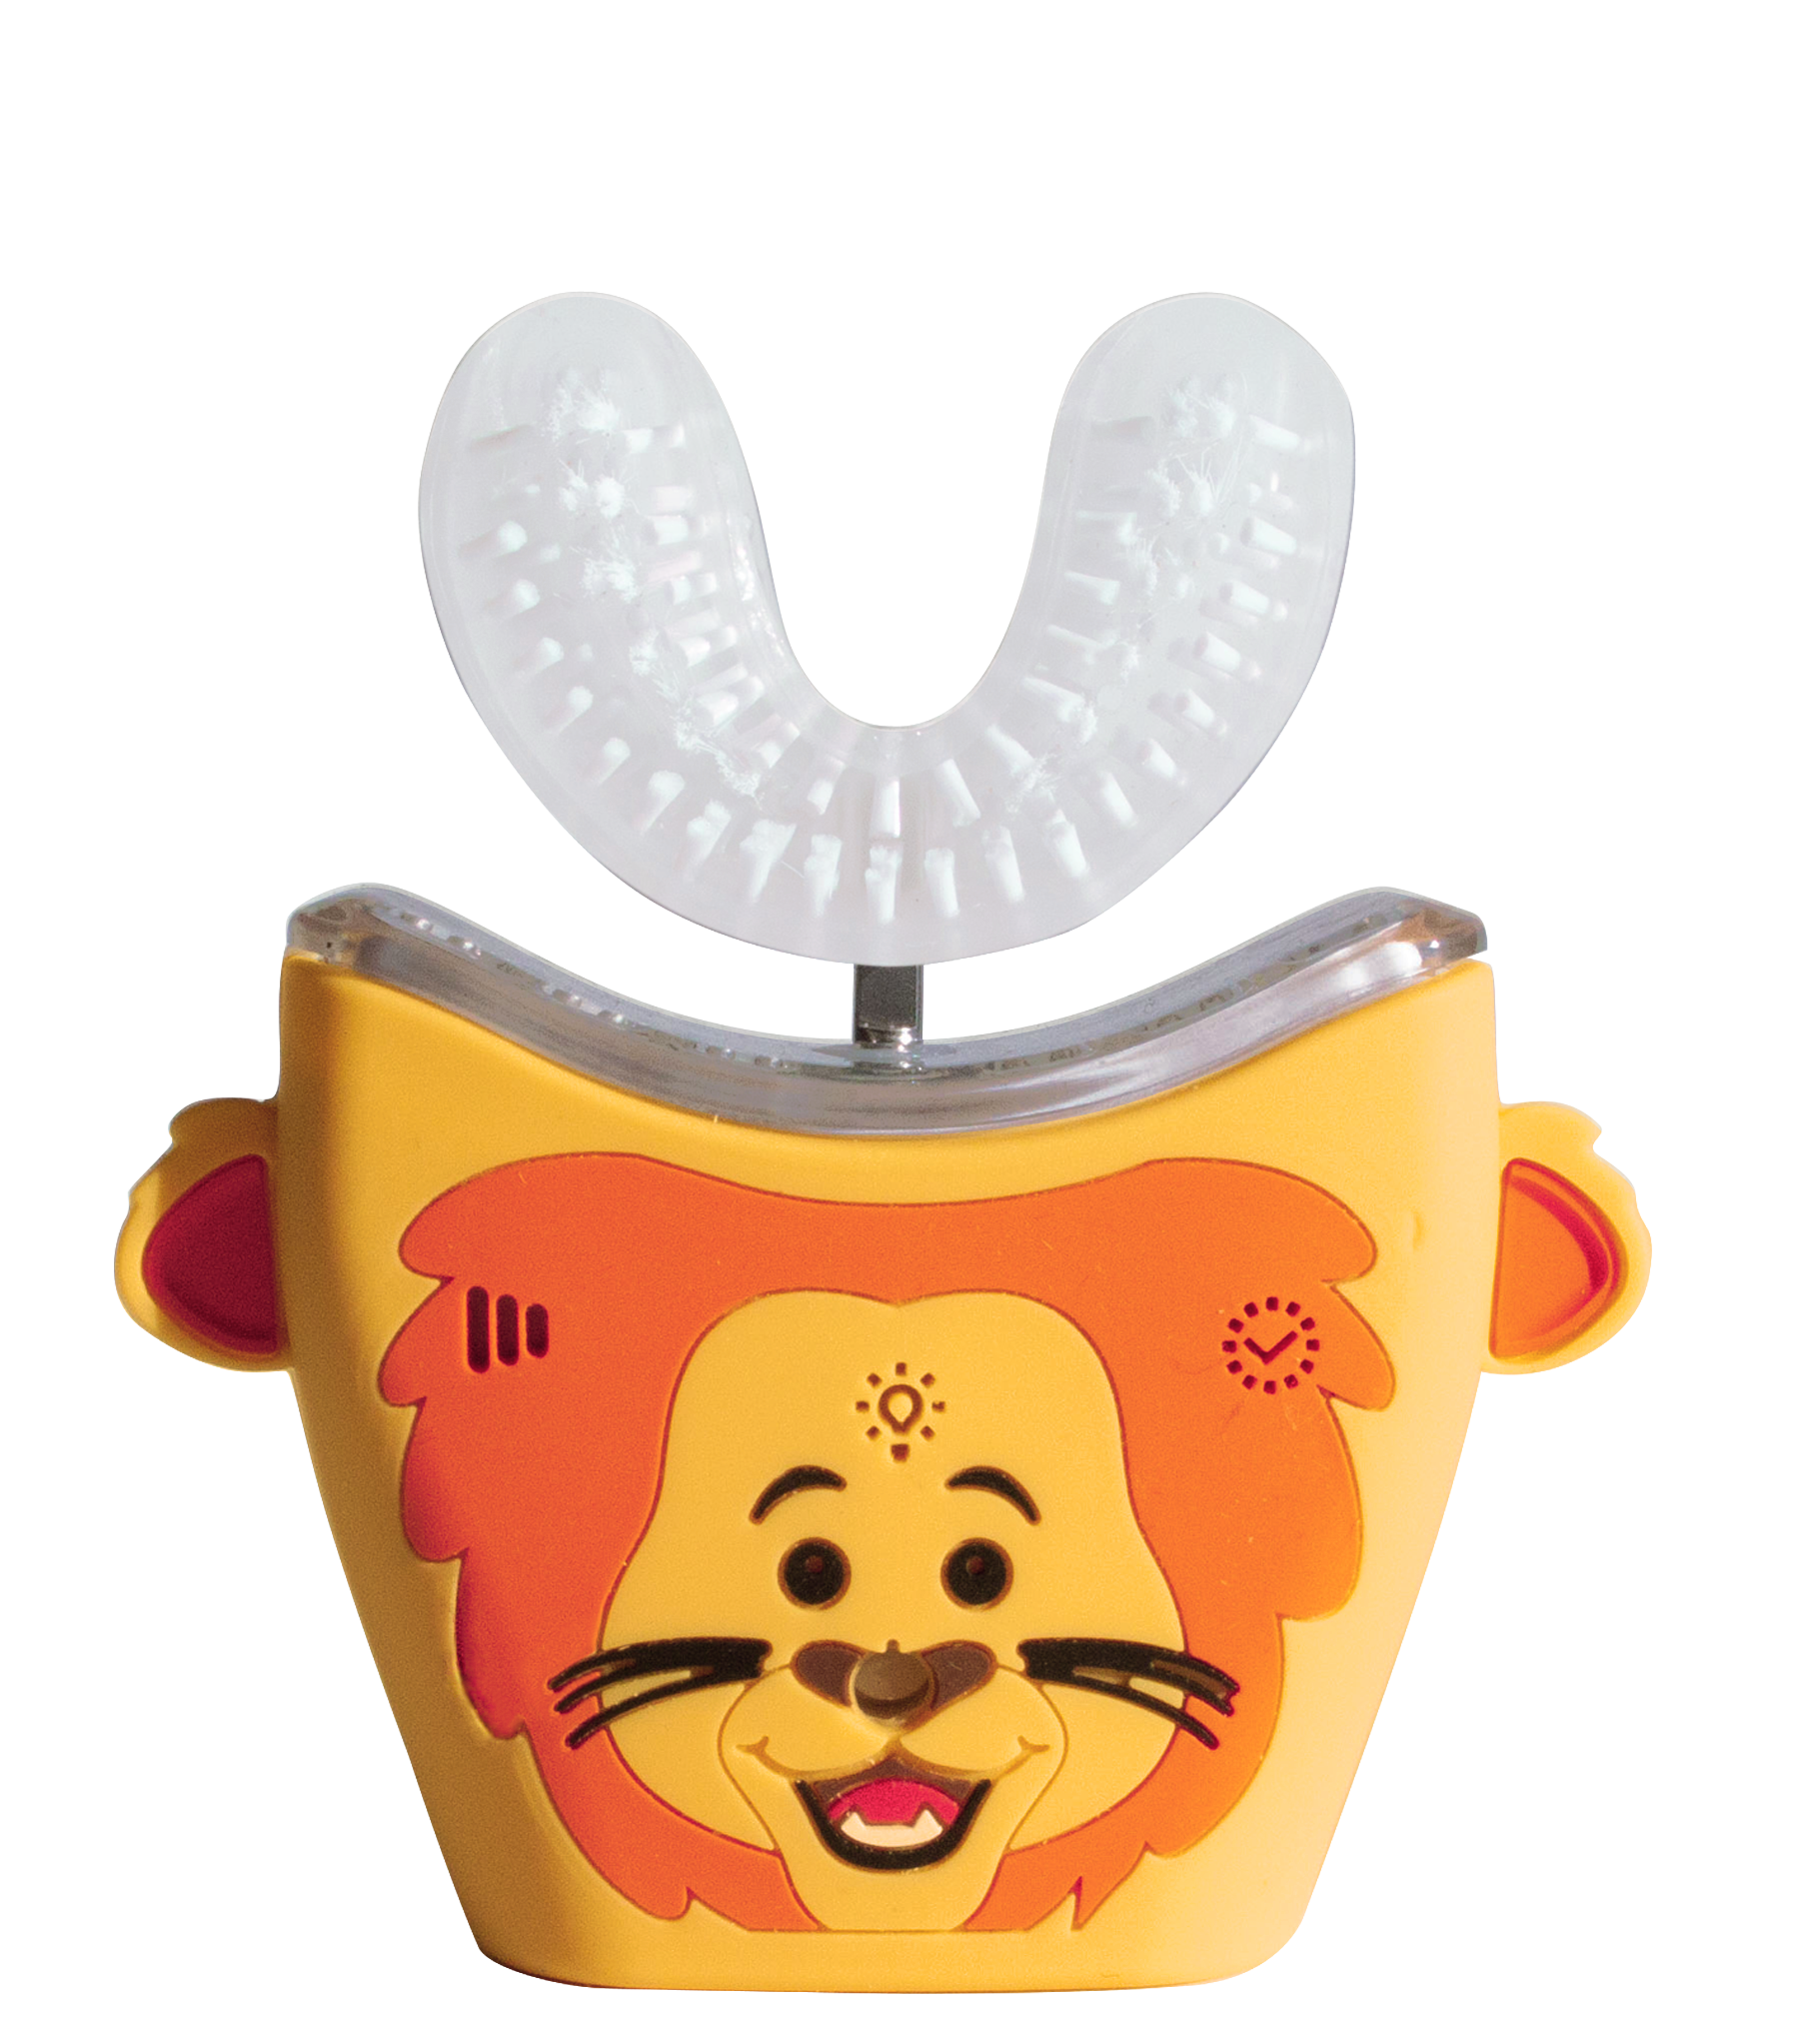 A colorful children's toothbrush sanitizer with a lion design.